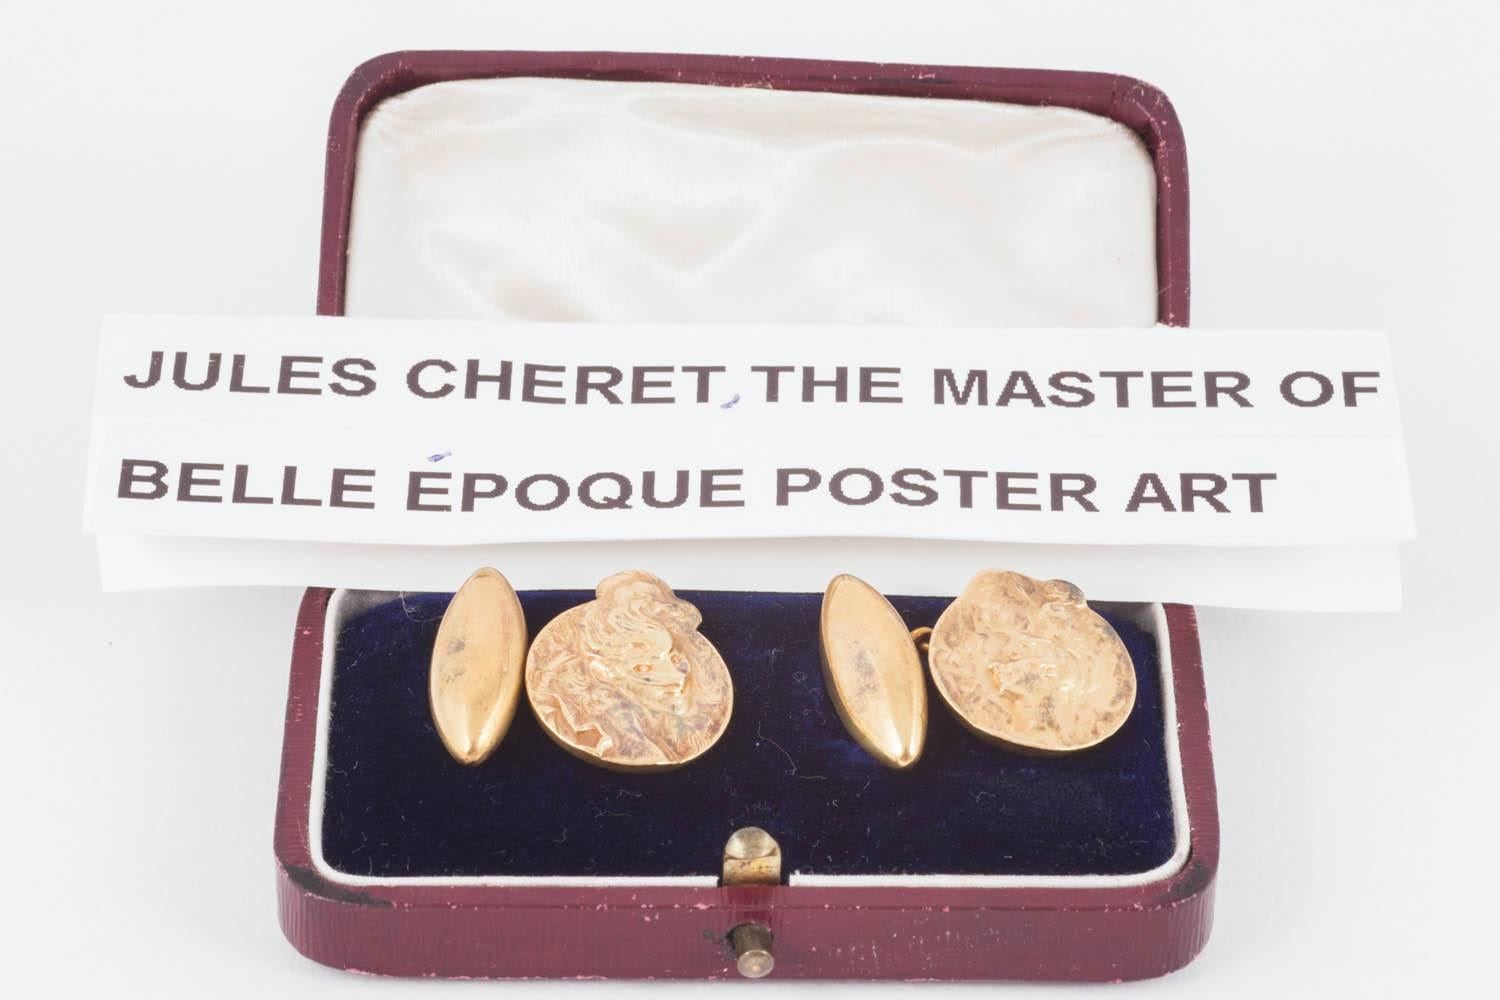 An interesting pair of antique cufflinks in carved 18 karat yellow gold from the Art Nouveau period. Single sided with a women with flowing hair on one face and wearing a theatrical mask on the other. Signed by Jules Cheret, the master of Belle